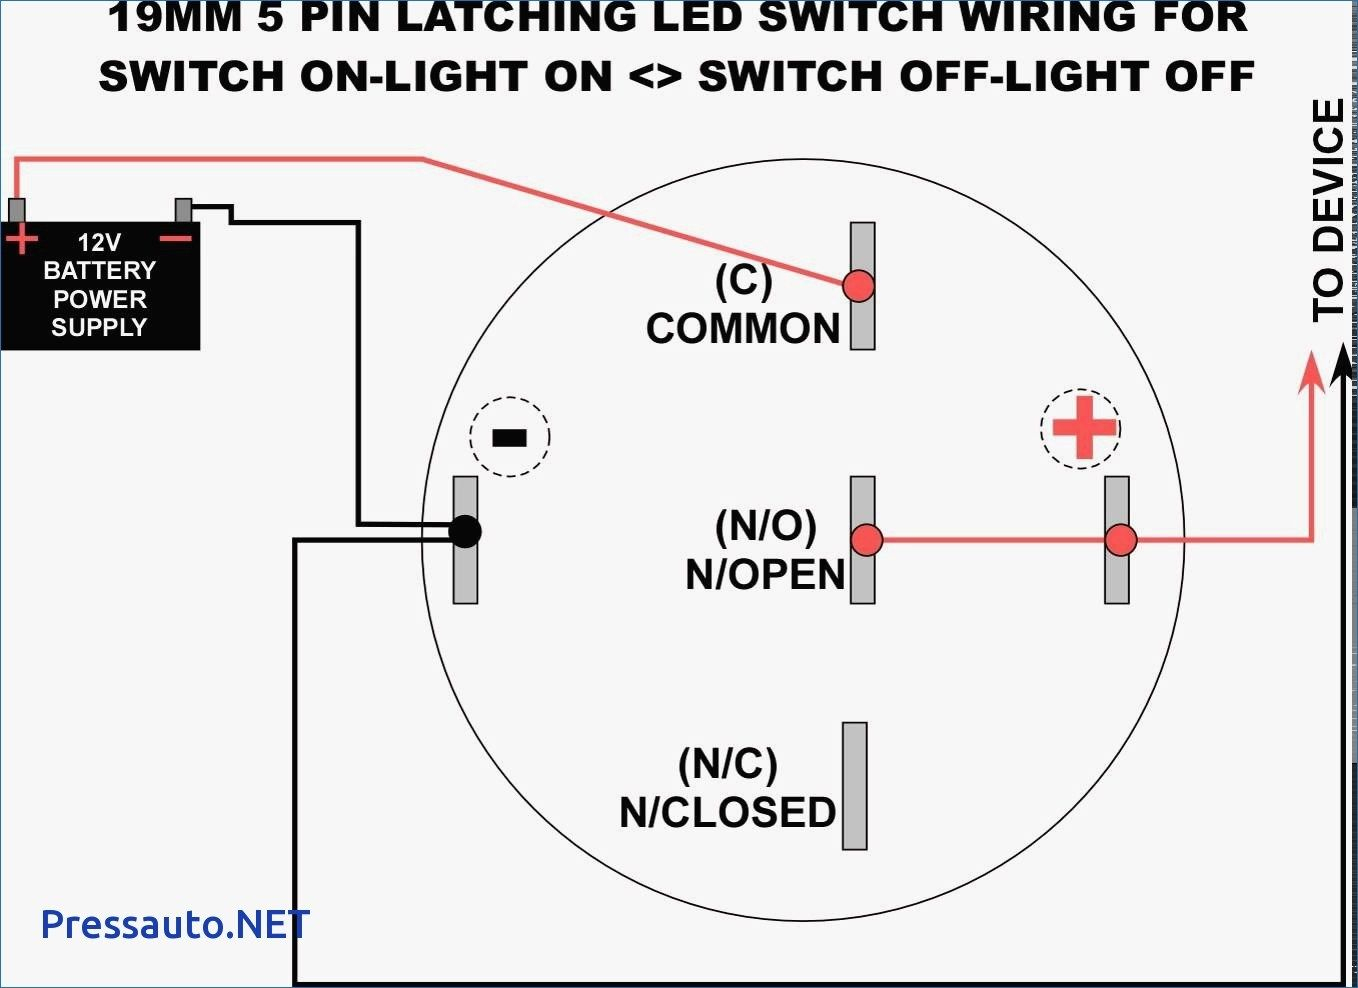 Best Relay Wiring Diagram 5 Pin Bosch 3 Prong Headlight For Switch - 3 Prong Plug Wiring Diagram